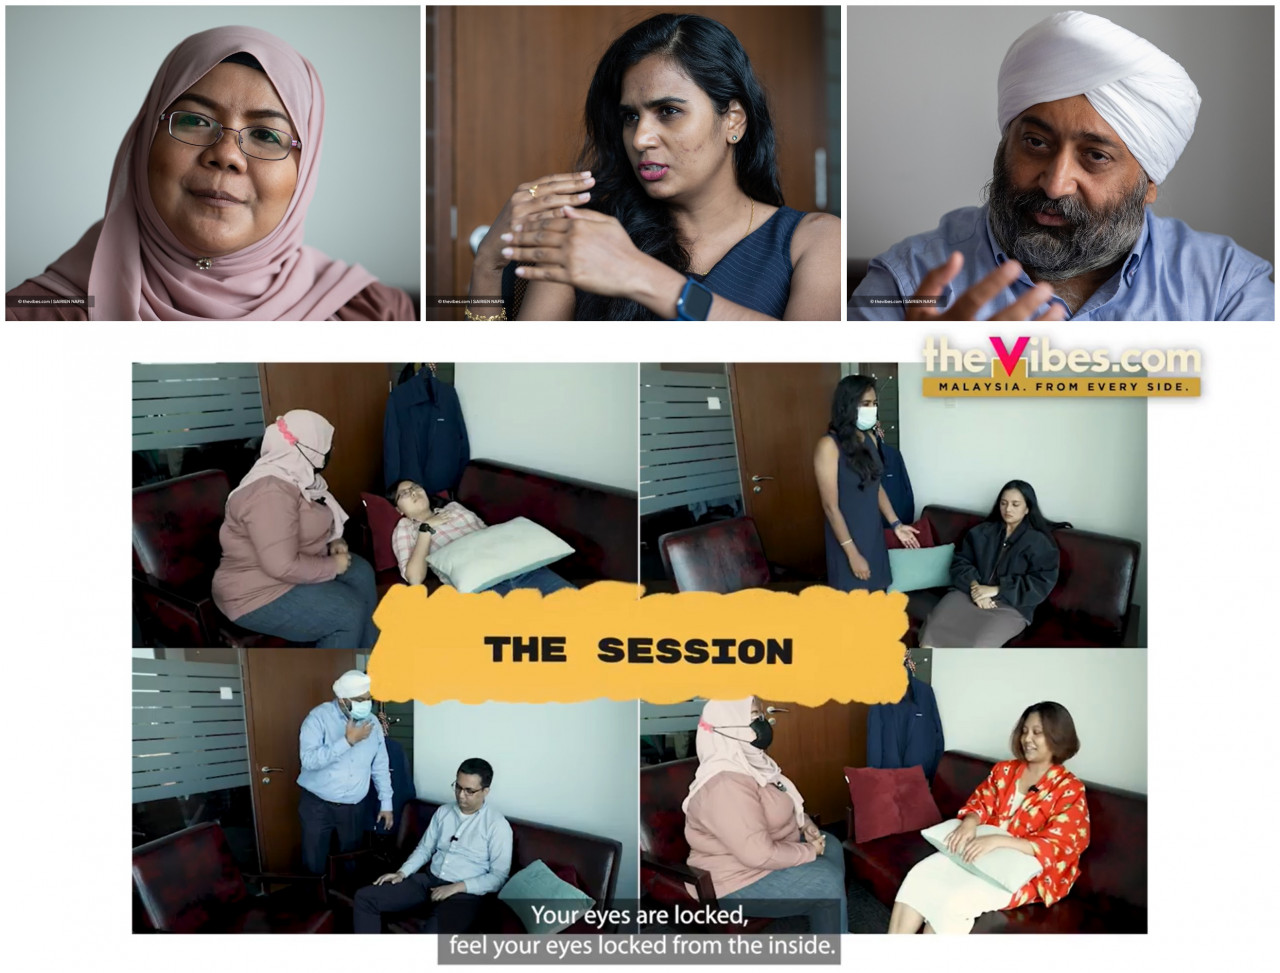 (Clockwise from top left) Certified hypnotherapists Sharifah Fadzlin Yahaya, Phemilla Mair Krishnan, and Jespal Singh Sidhu. We put some of our staff to test the hypnotherapy approach in hopes of tackling the things that bother them most. — The Vibes/Sairien Nafis & Syeda Imran pic